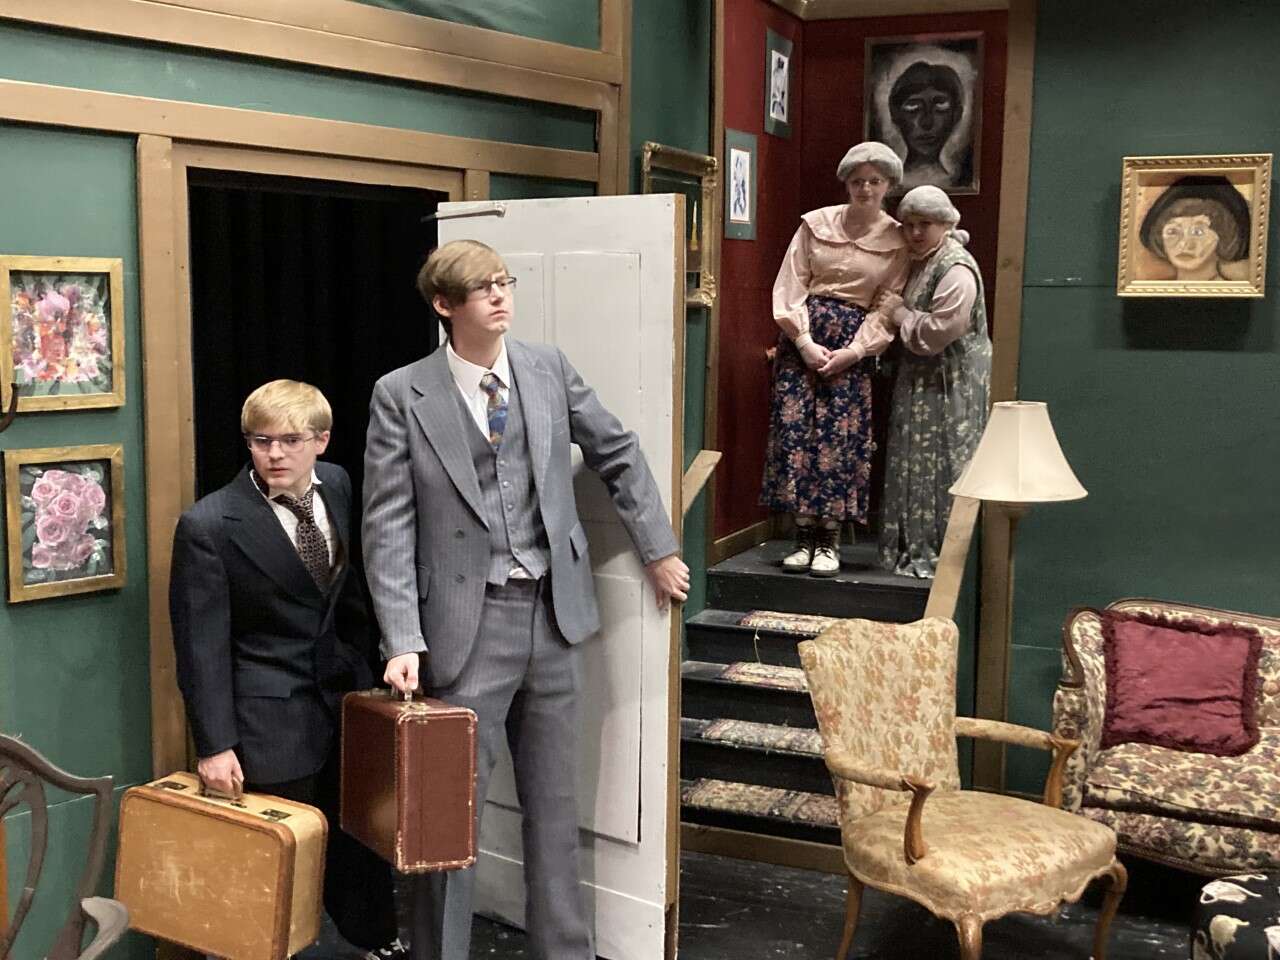 Arsenic and Old Lace' performed with flair and style – The Mercury